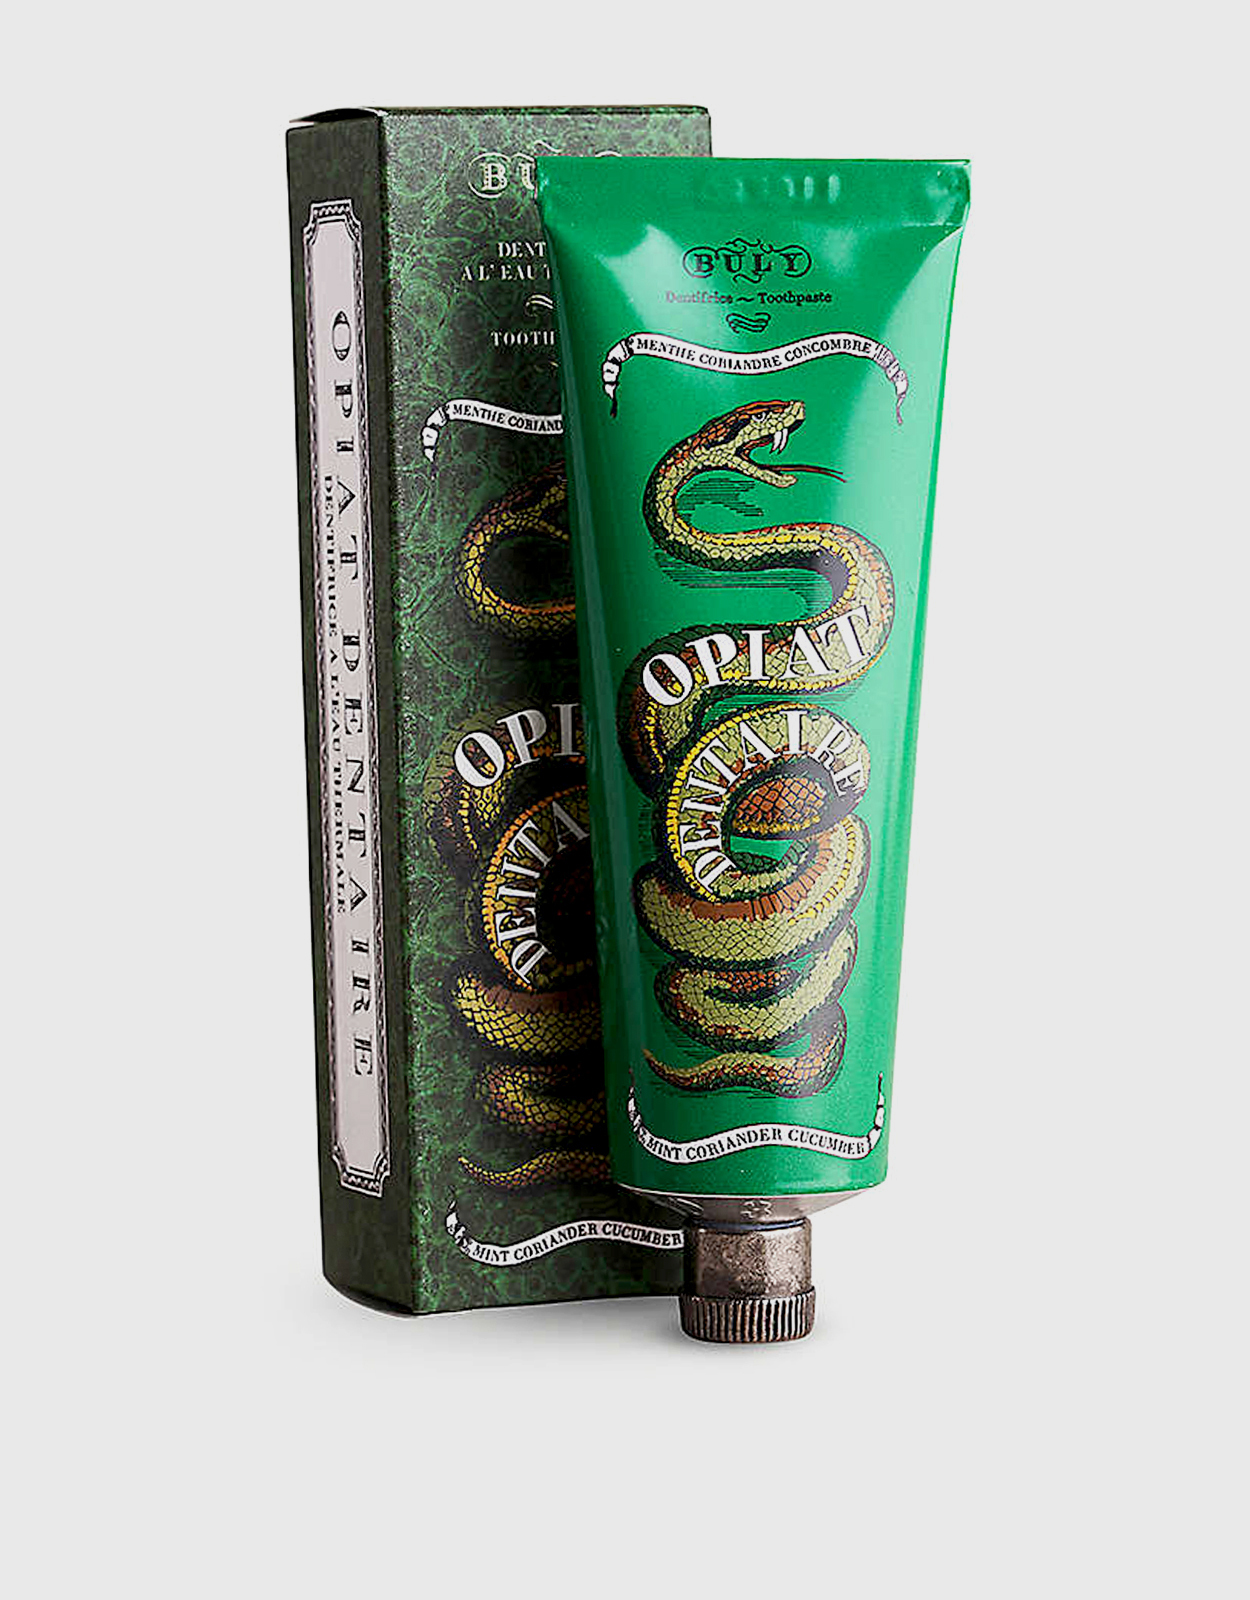 BULY 1803 Opiat Dentaire Mint Coriander Toothpaste 75g (Bath and